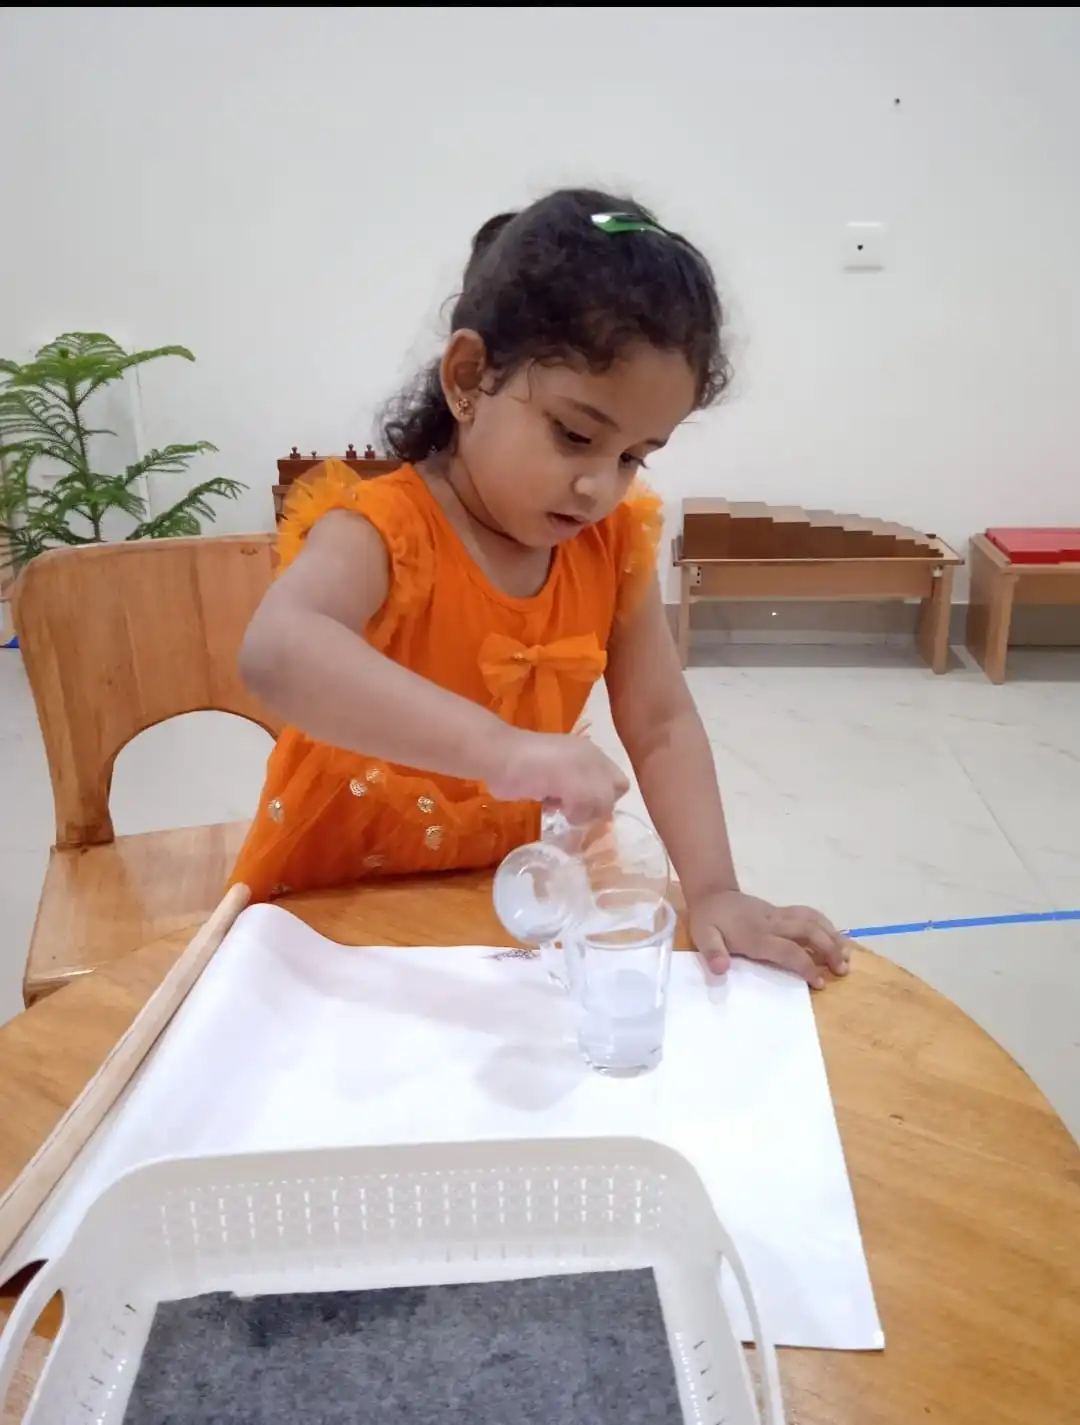 Child learning to roll dough